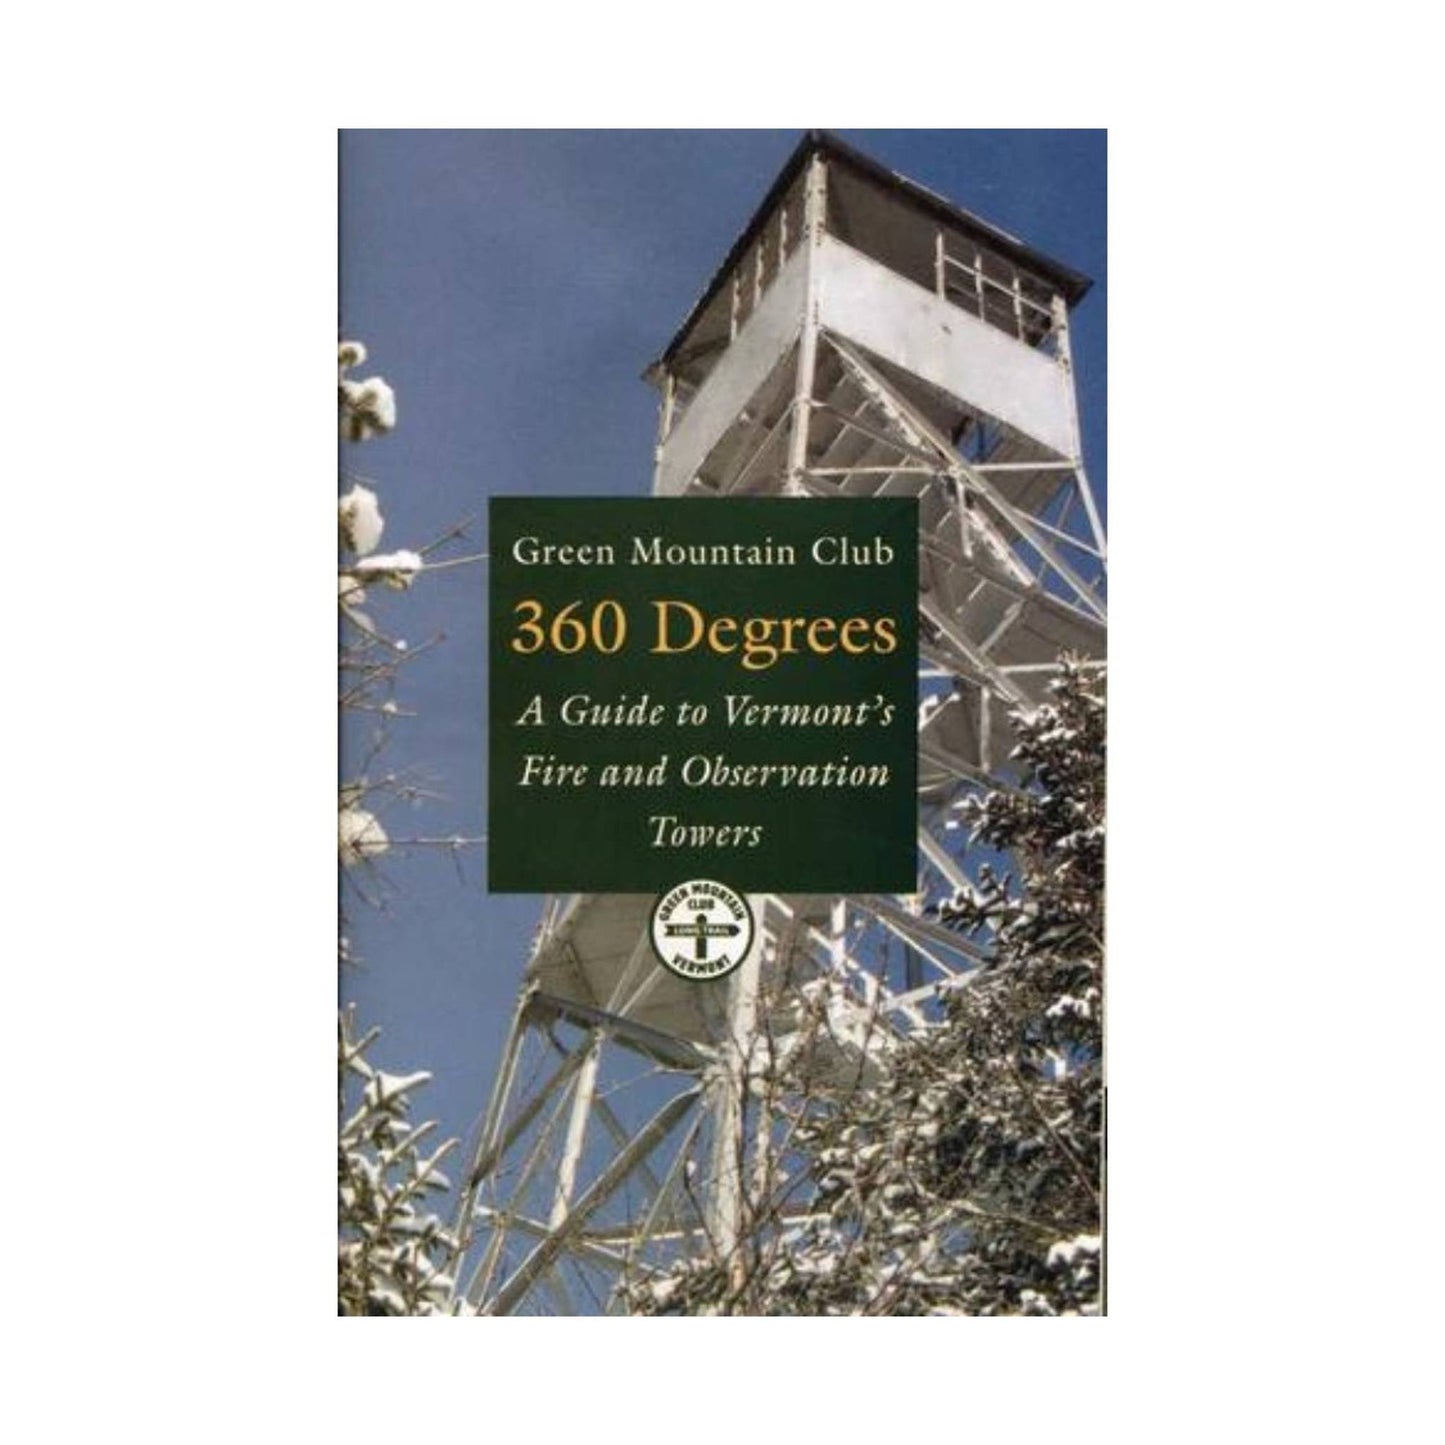 Green Mountain Club 360 Degrees A Guide to Vermont's Fire and Observation Towers 1st Edition